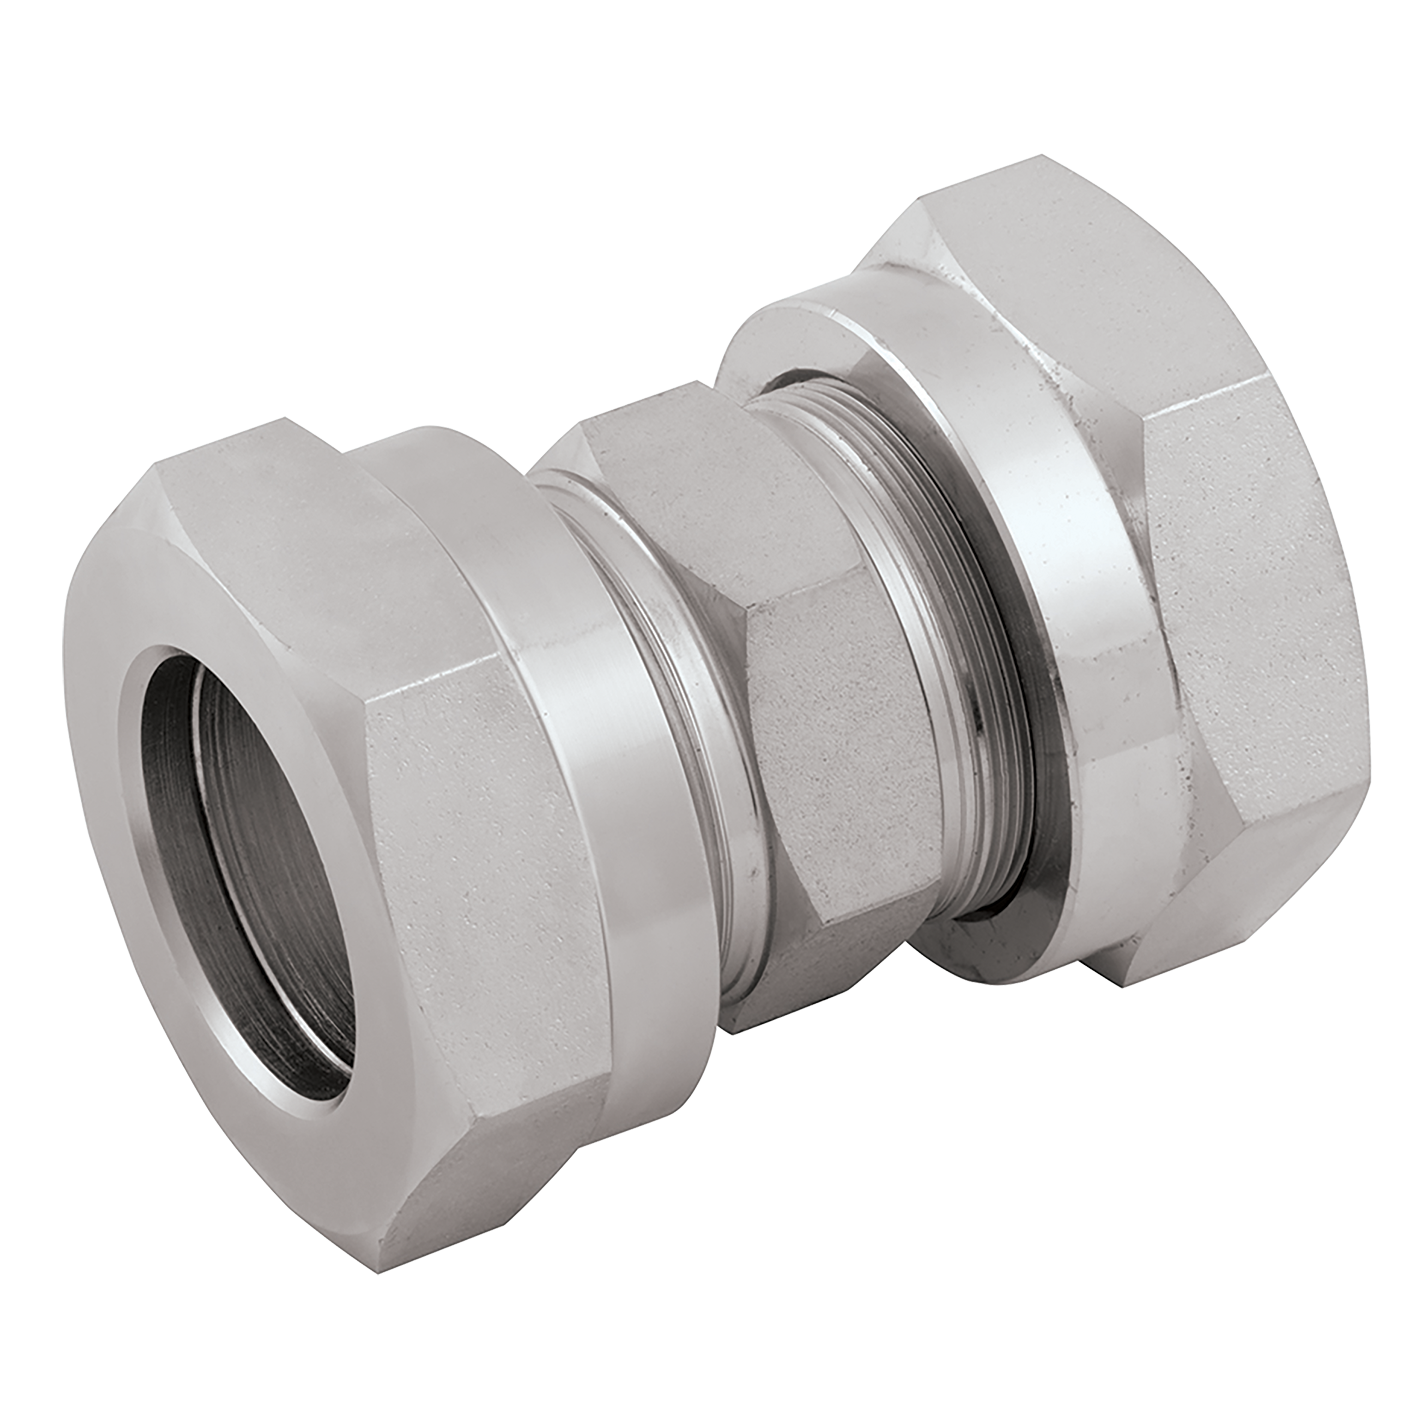 1" NB EQUAL STRAIGHTAIGHT COUPLING